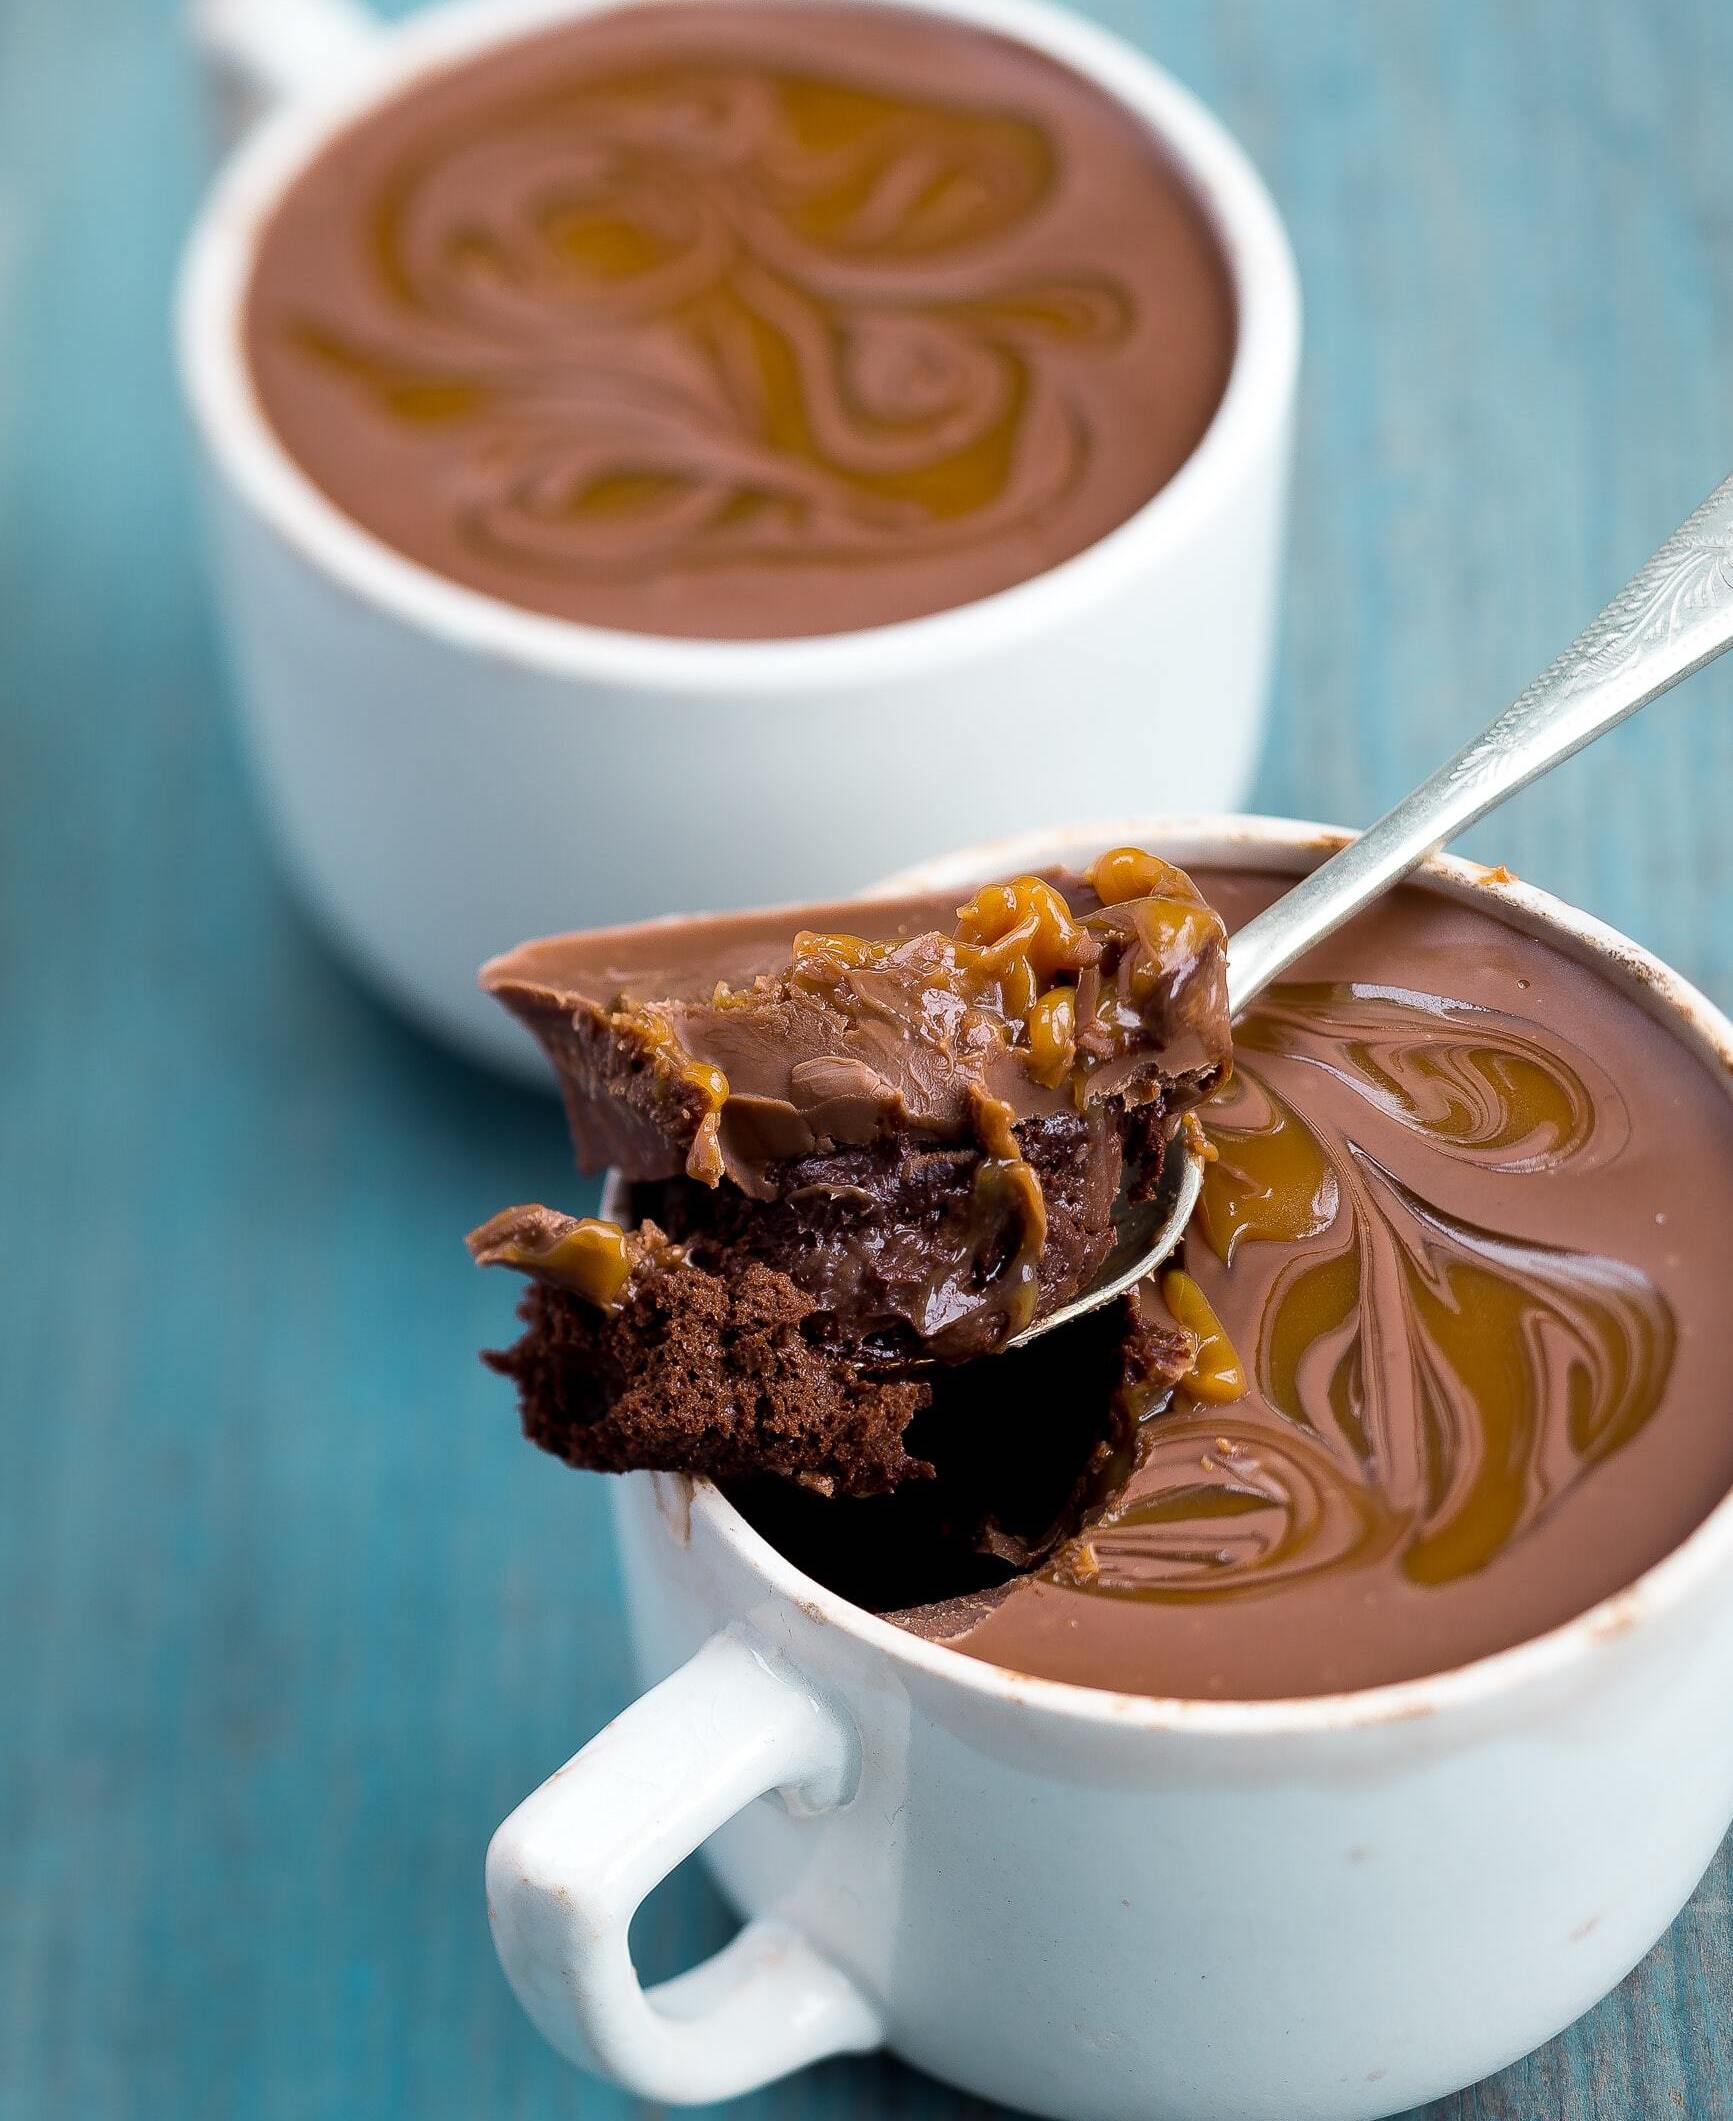 You are currently viewing Mug cake recipes to satisfy those late-night cravings